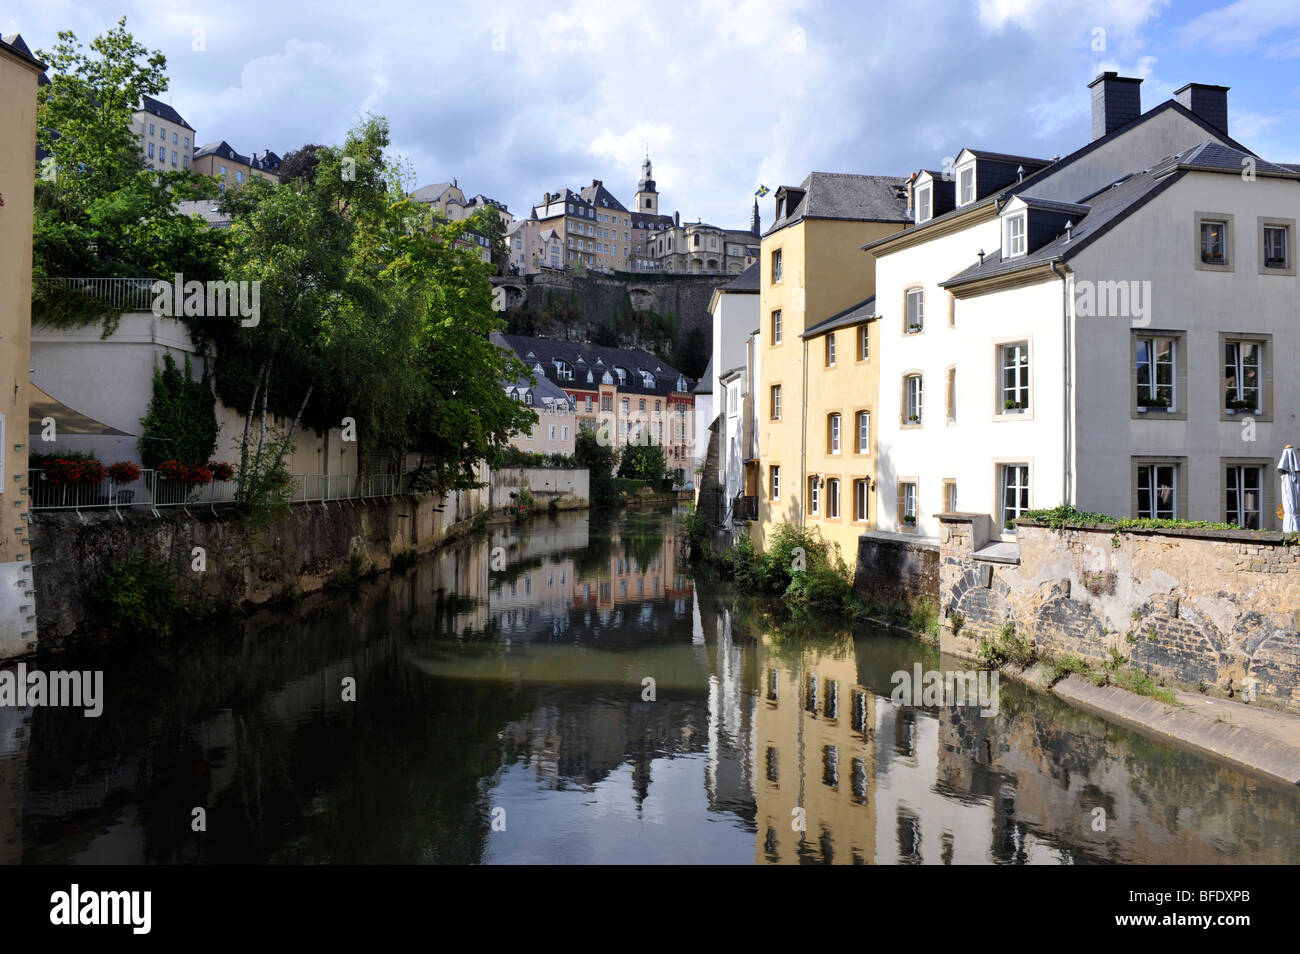 River Aizette flows through the Old Town, City of Luxembourg, Europe. Stock Photo